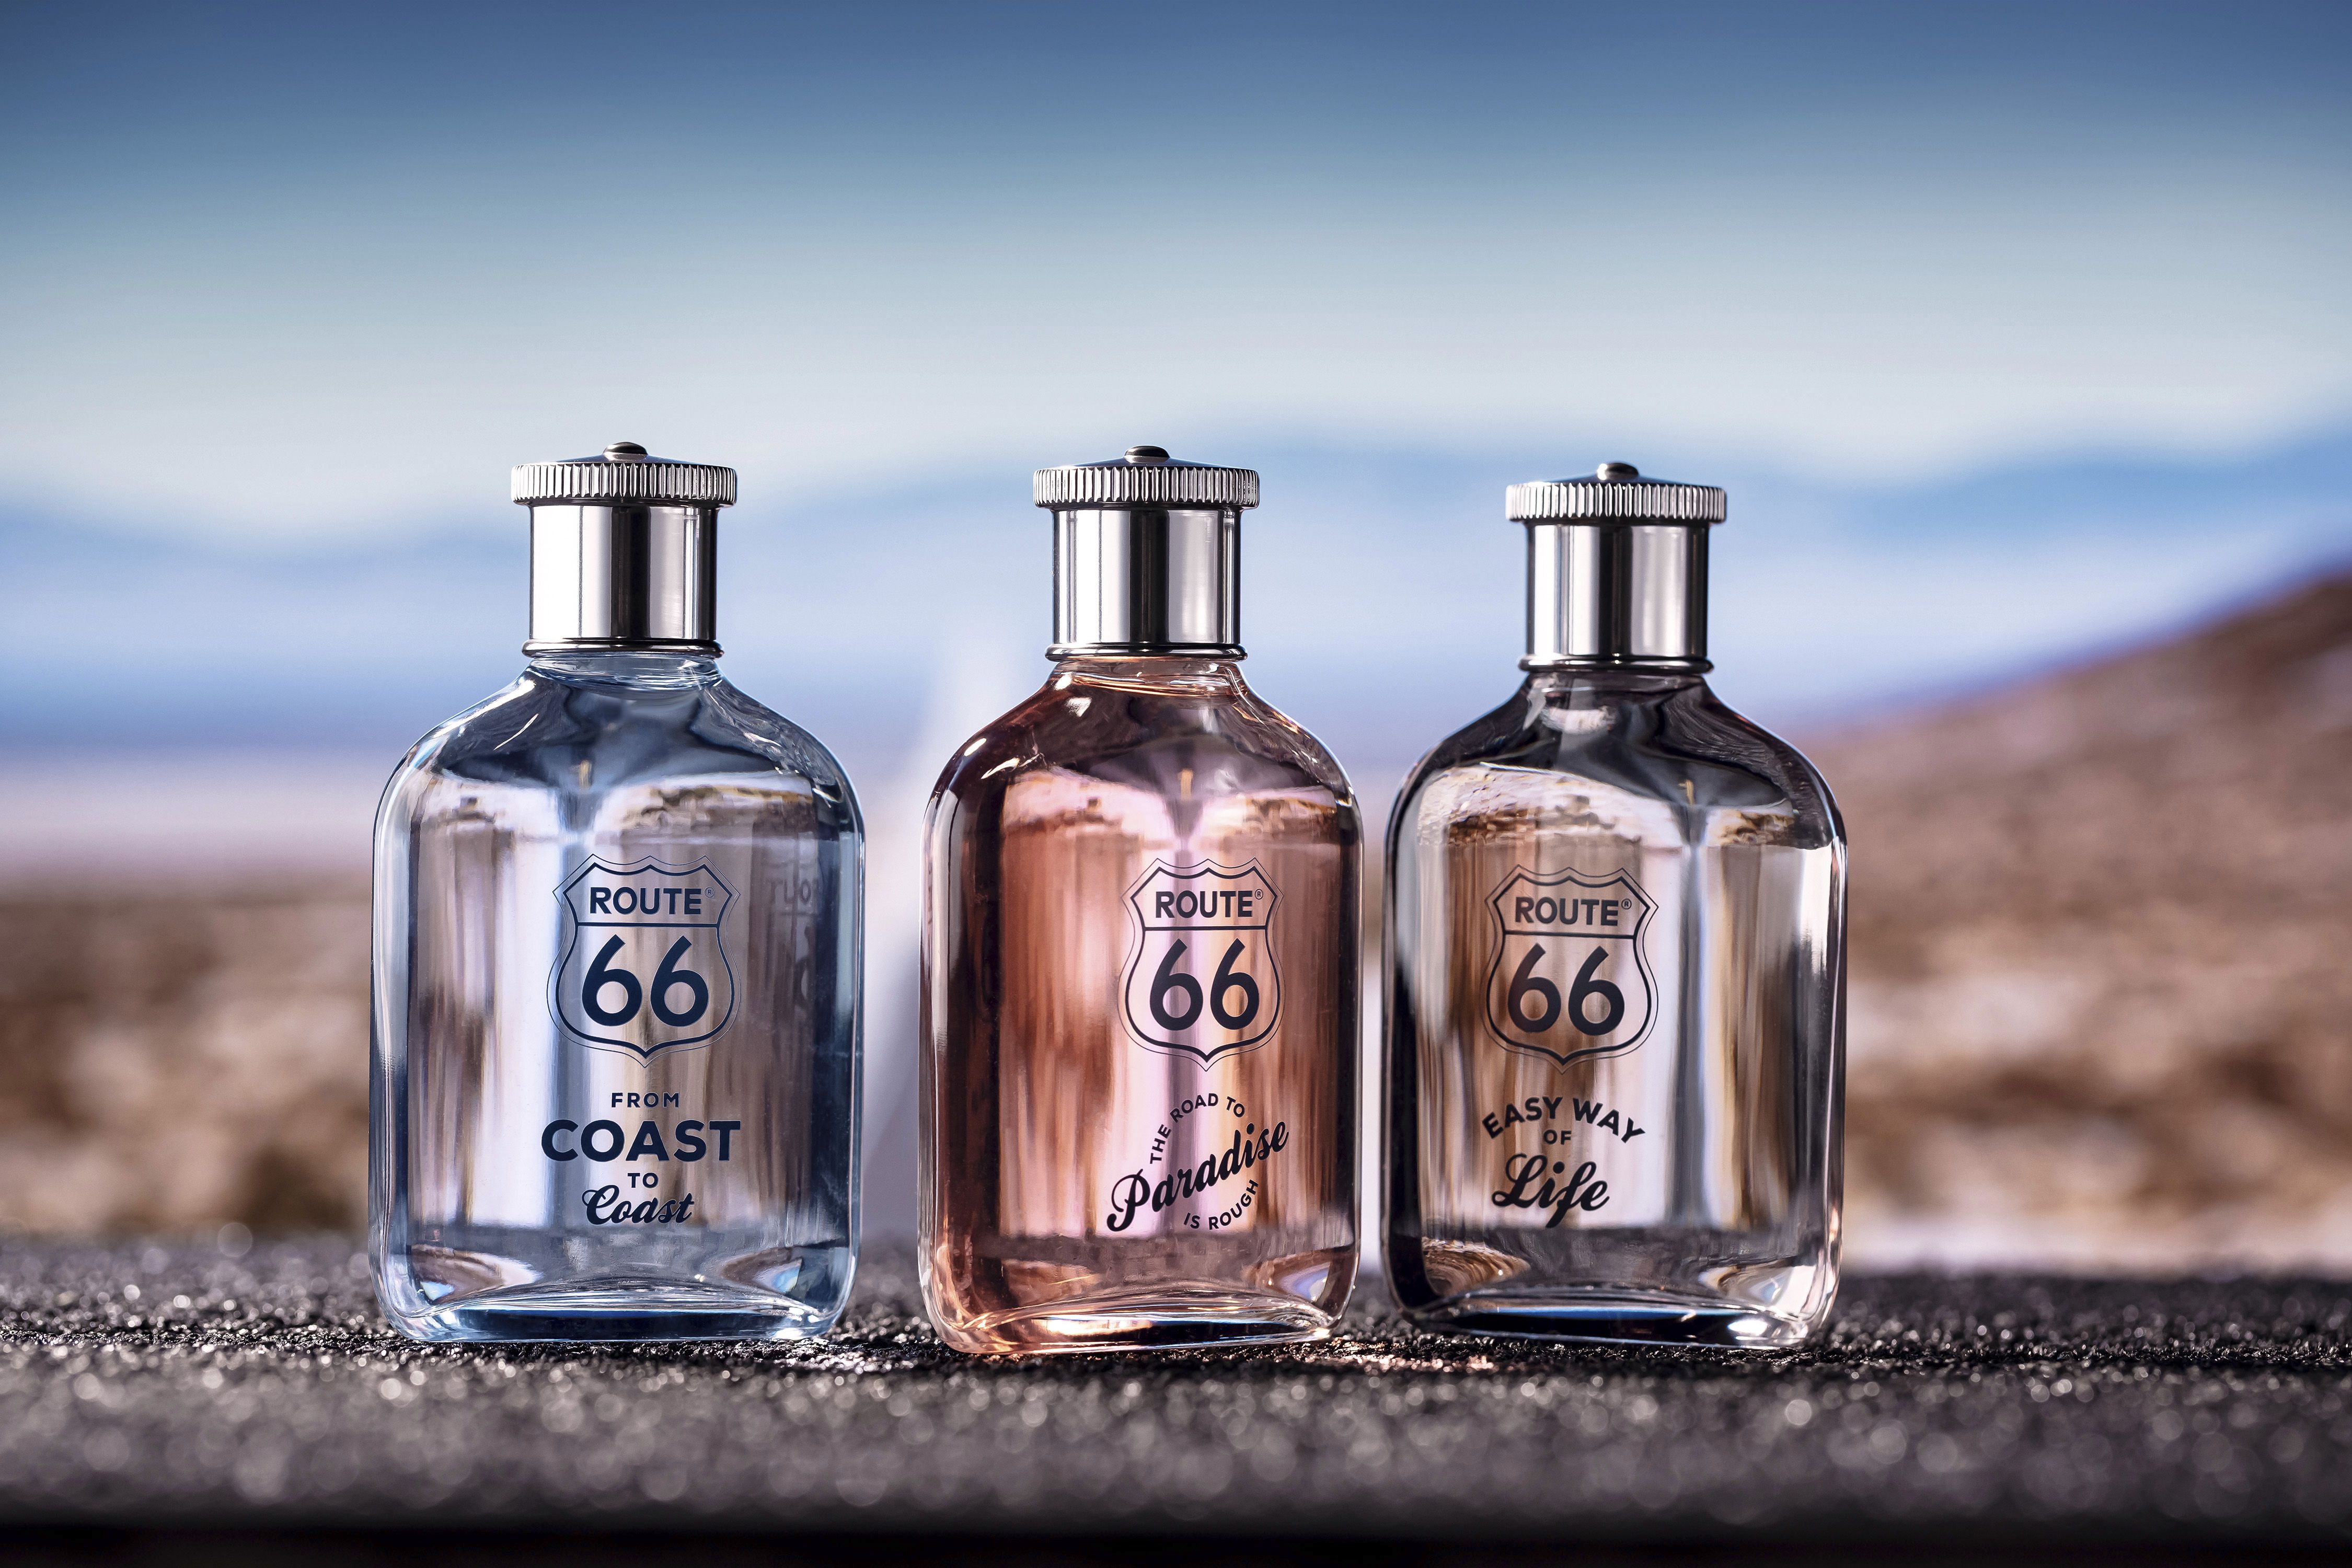 The Road to Paradise is Rough Route 66 cologne - a new fragrance for ...